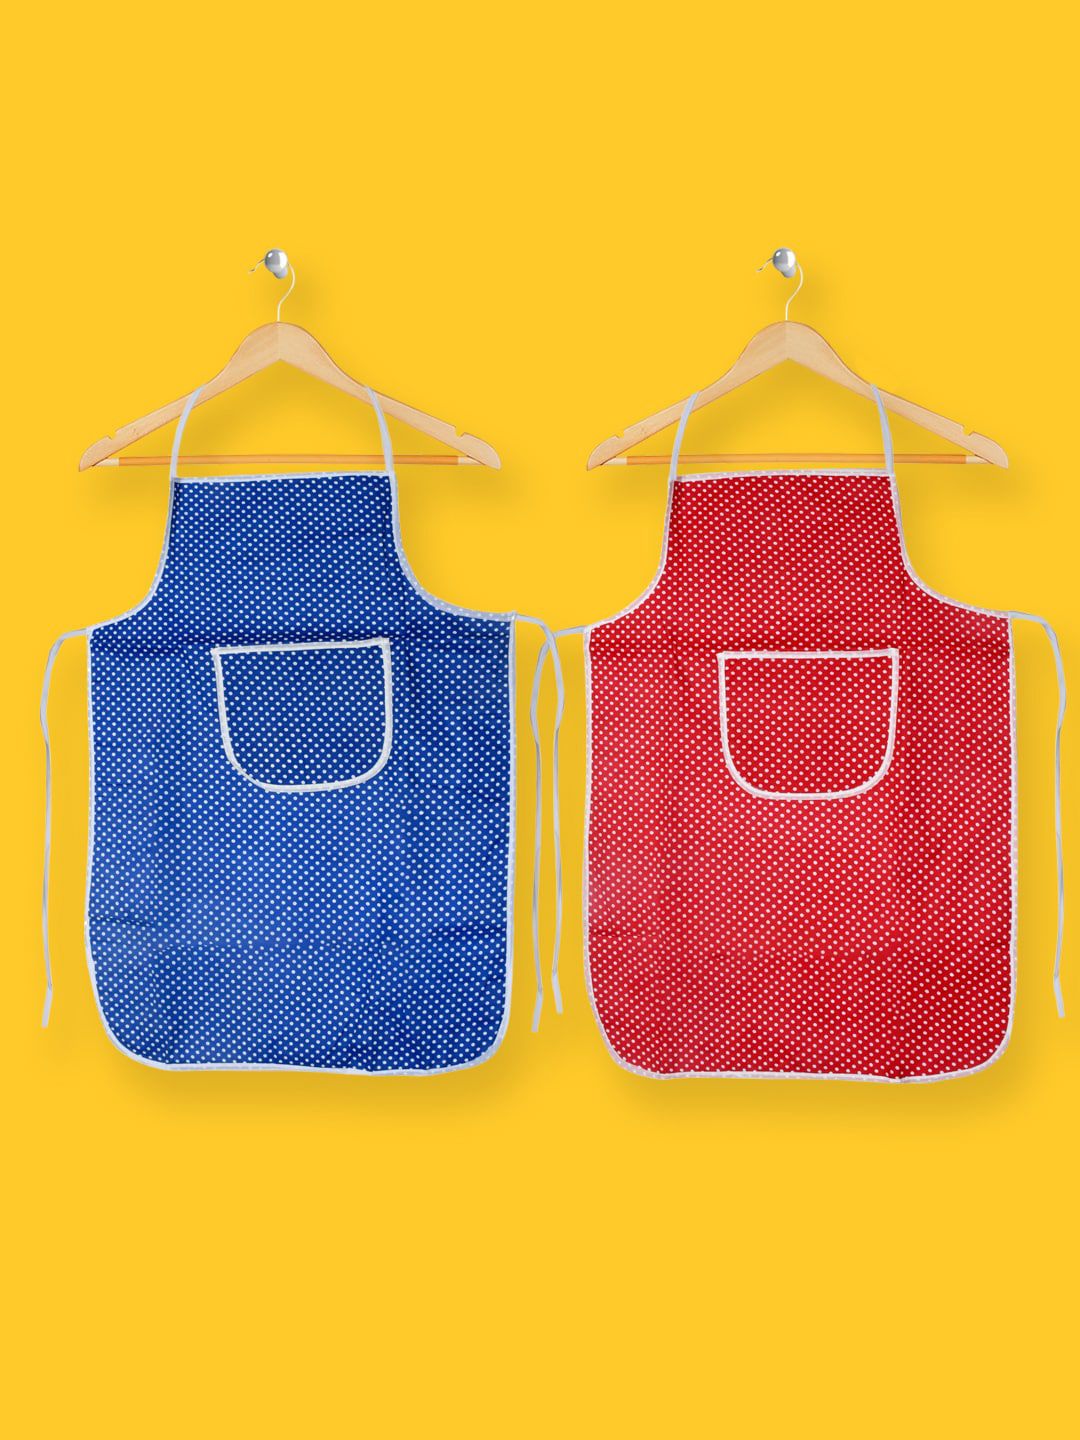 Kuber Industries Unisex Set Of 2 Polka Dots Cotton Waterproof Kitchen Aprons Price in India